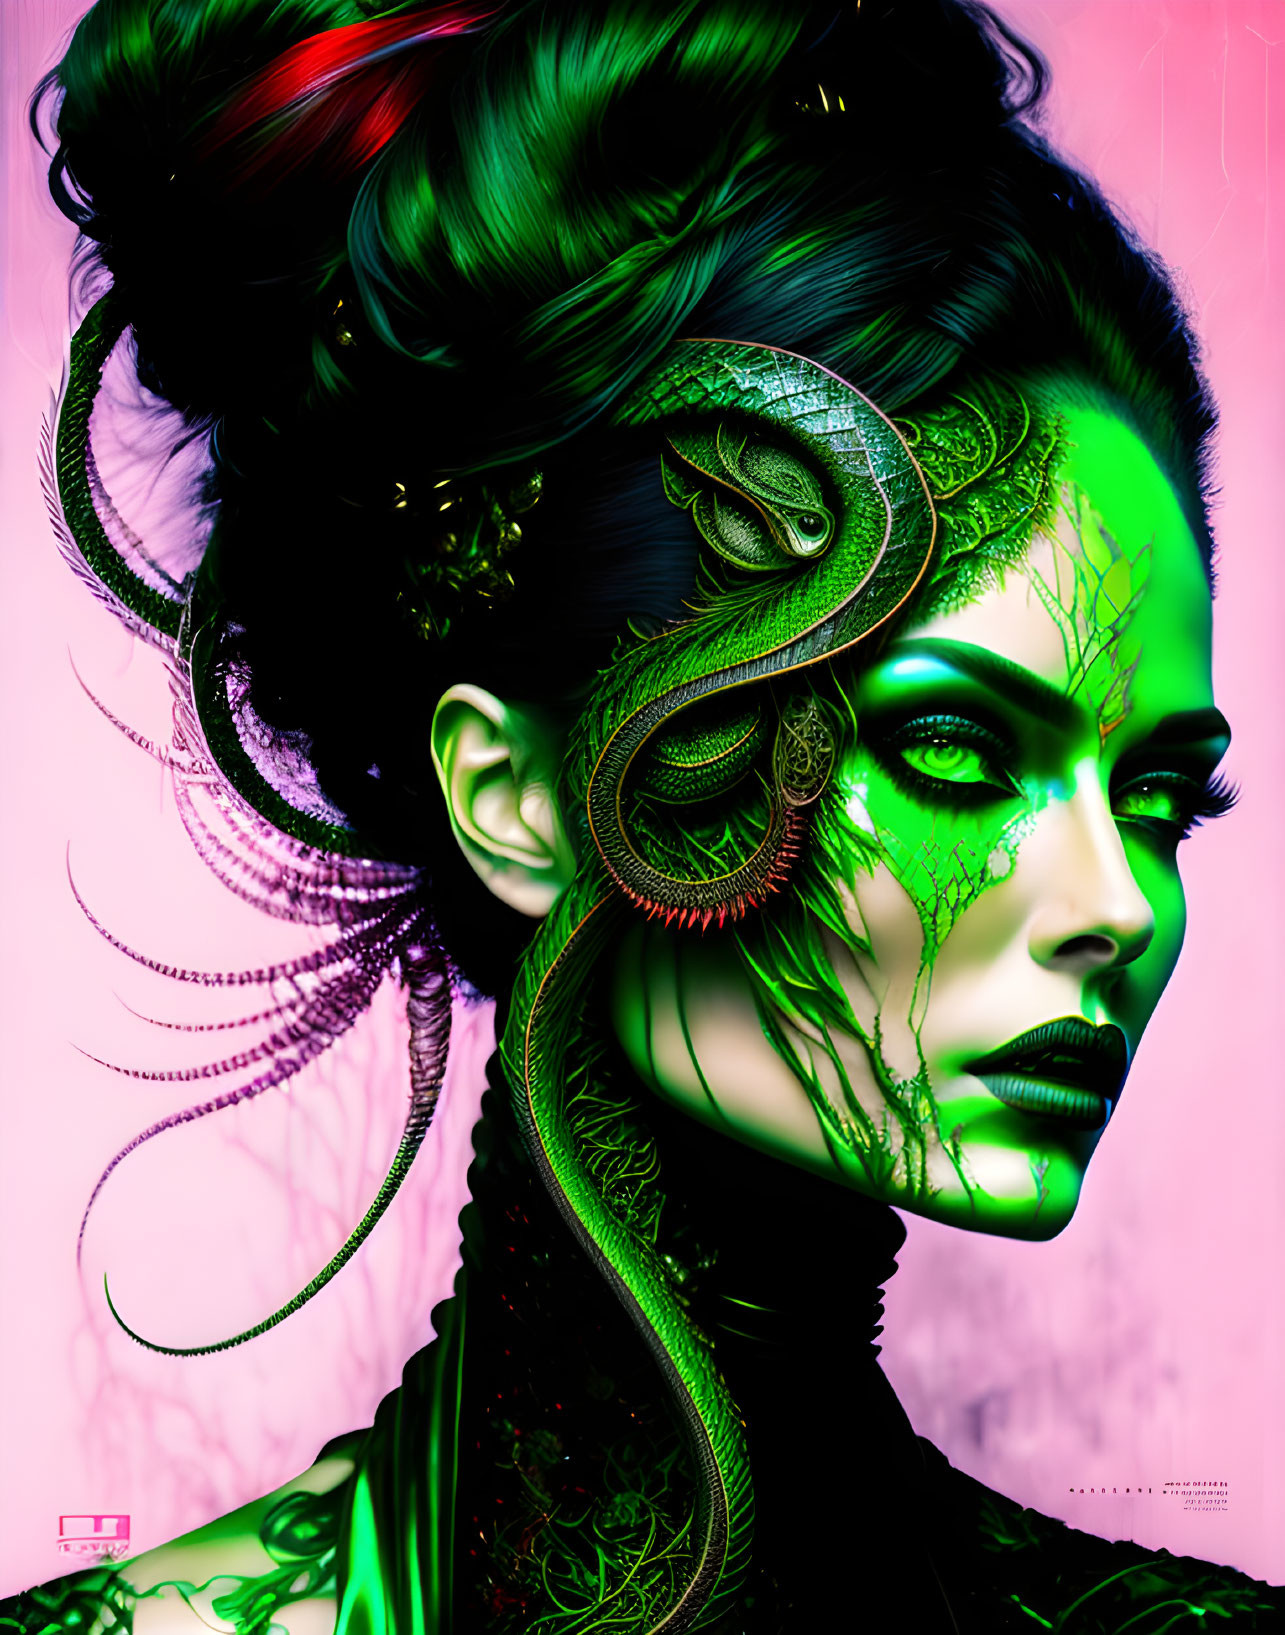 Digital artwork featuring woman with green skin patterns and serpent-like hair accessory.